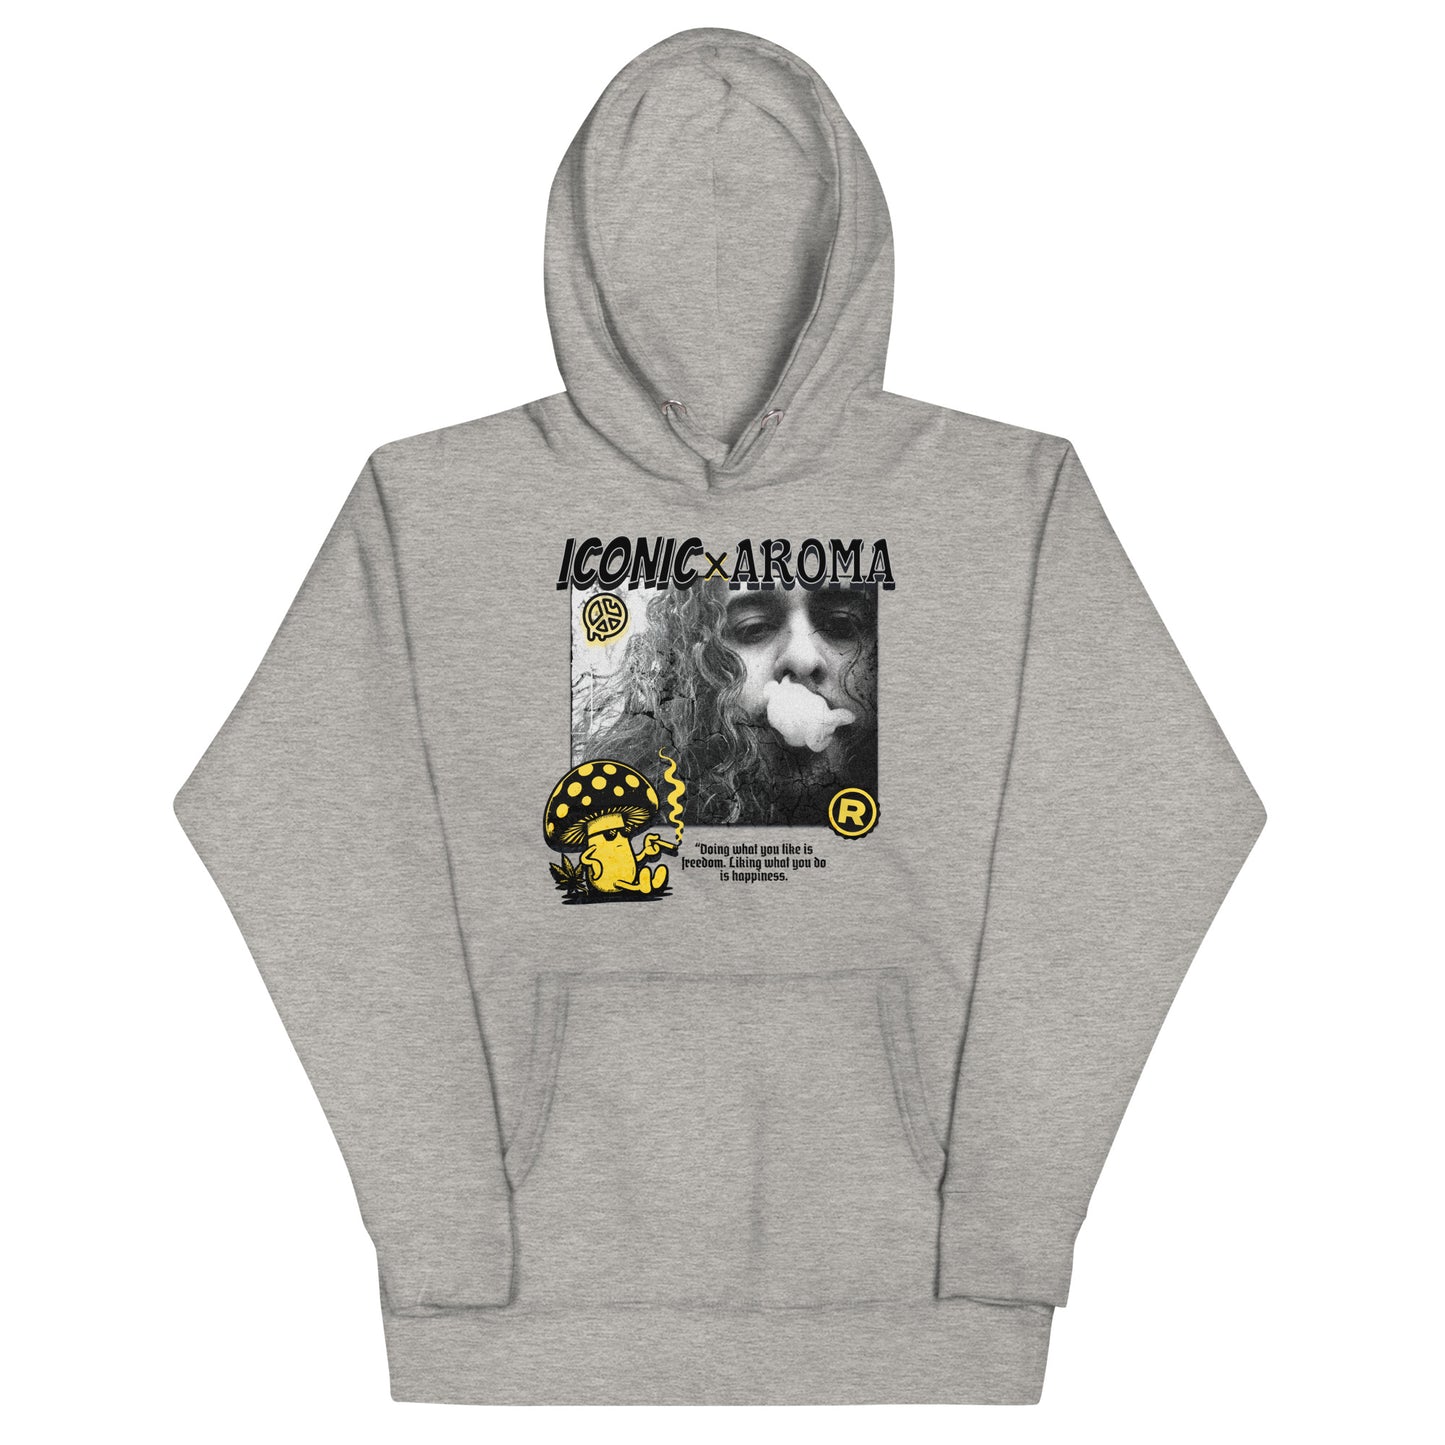 The Freedom and Happiness hoodie by Iconic Hustle x The Aroma